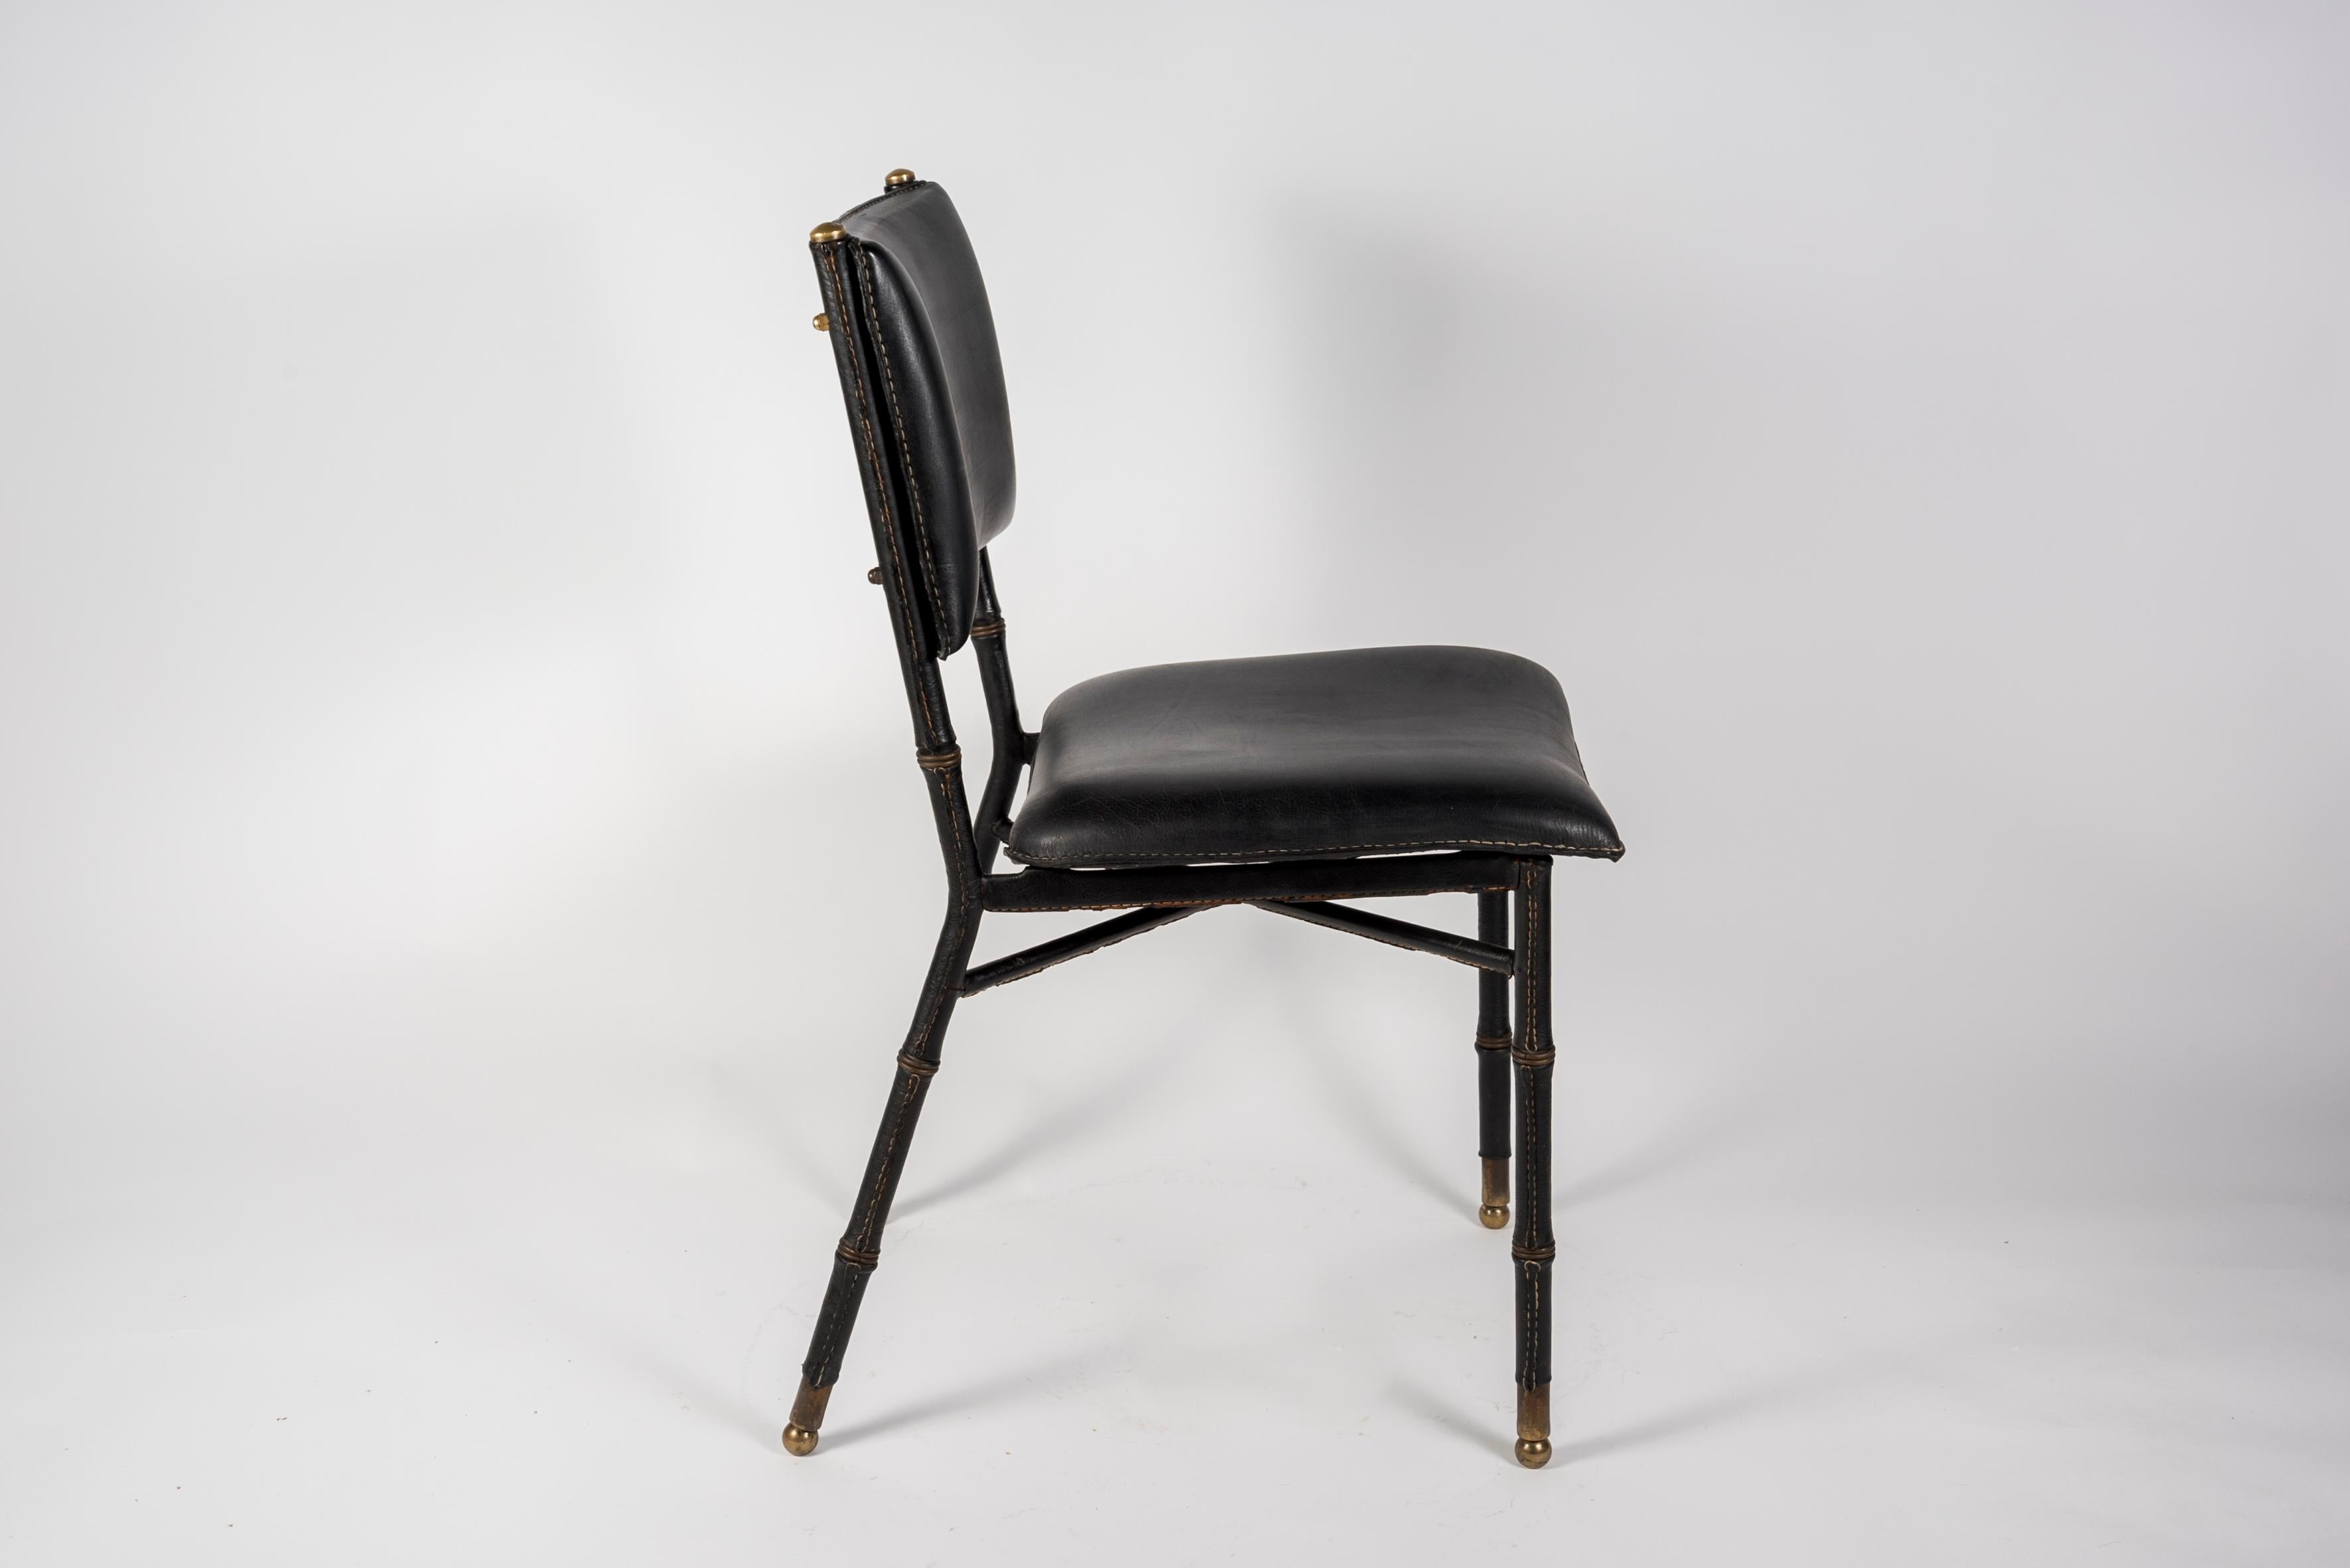 1950's Stitched Leather Chair by Jacques Adnet In Good Condition For Sale In Bois-Colombes, FR